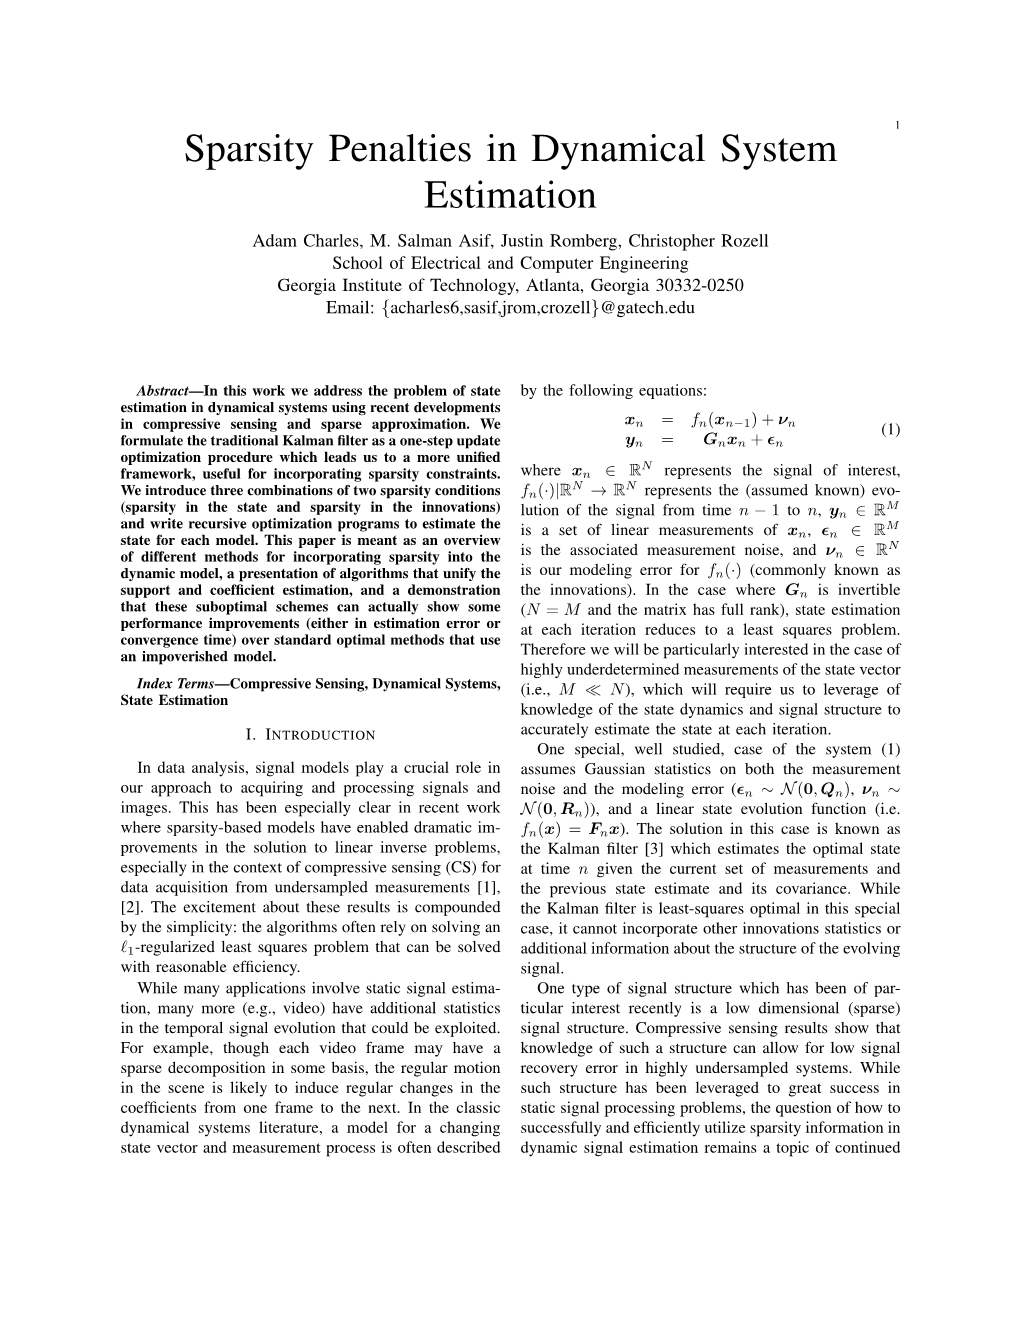 Sparse Penalties in Dynamical System Estimation